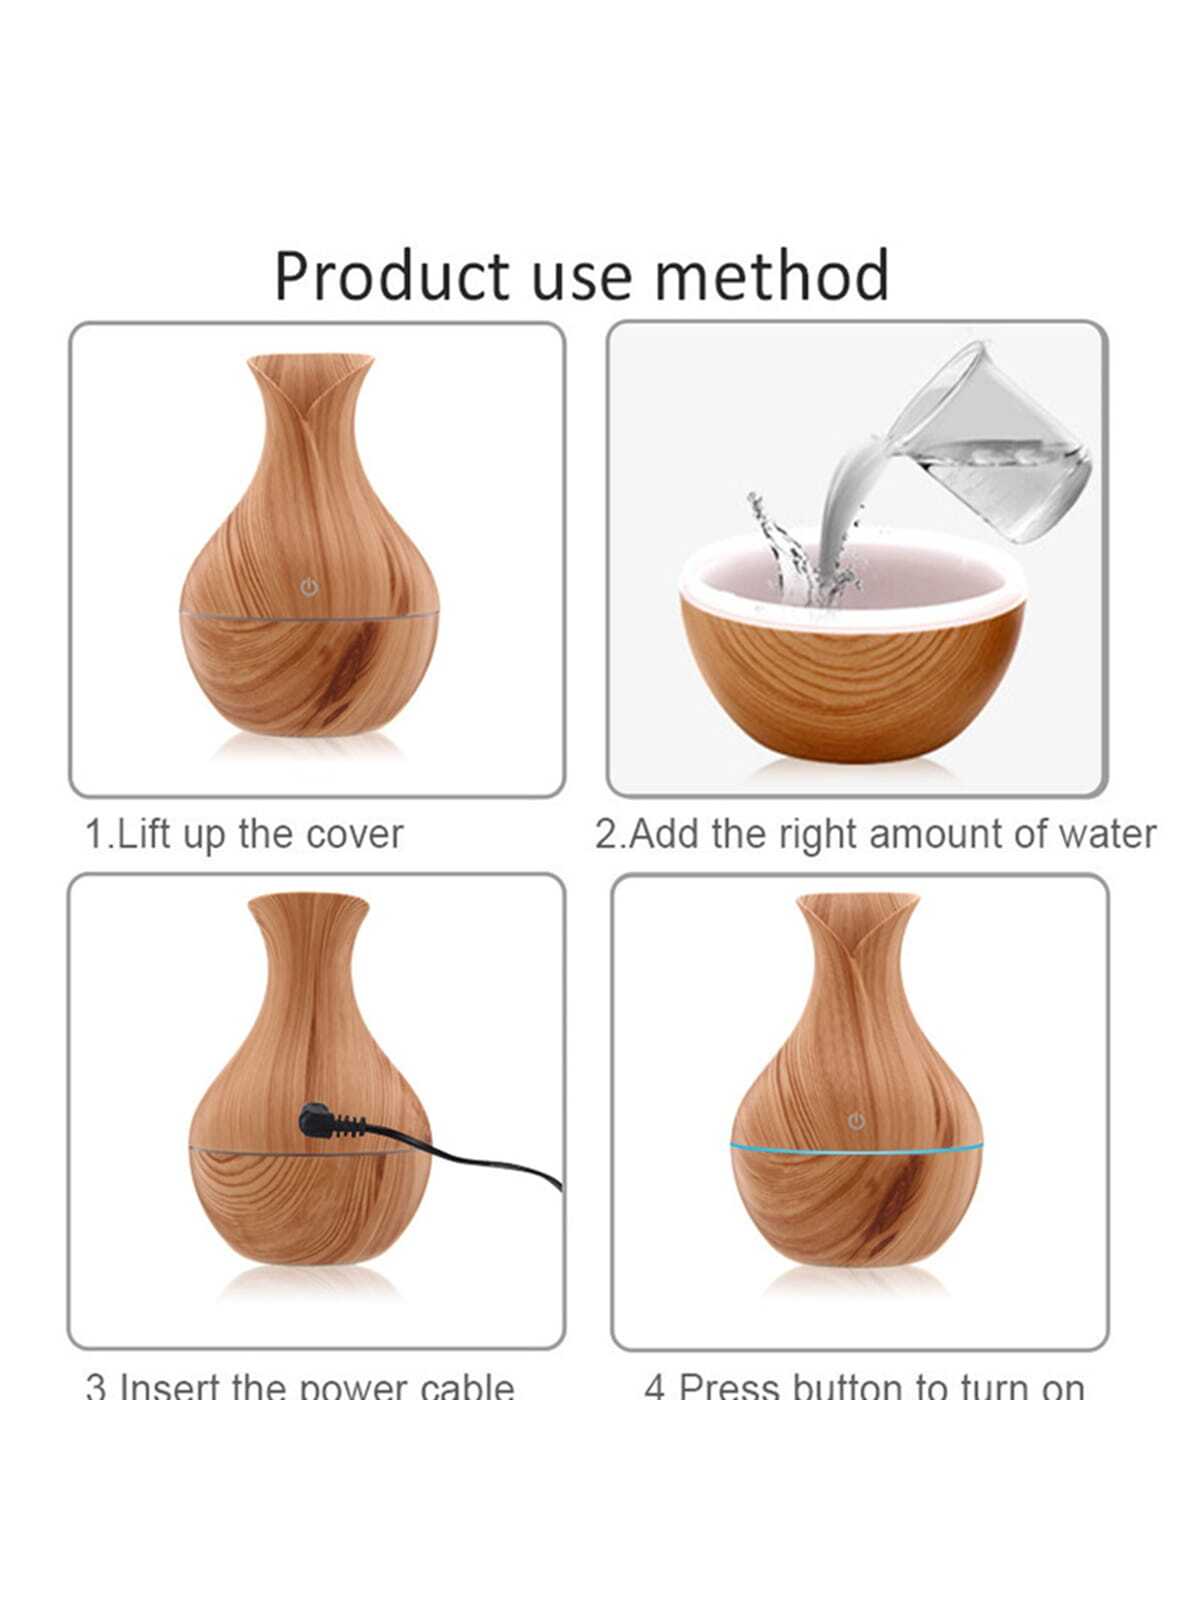 1pc Usb Wood Grain Flower Vase Shaped Humidifier With 7-color Led Light & Aroma Diffuser Function For Home, Office, Car Decoration-light wood grain-4